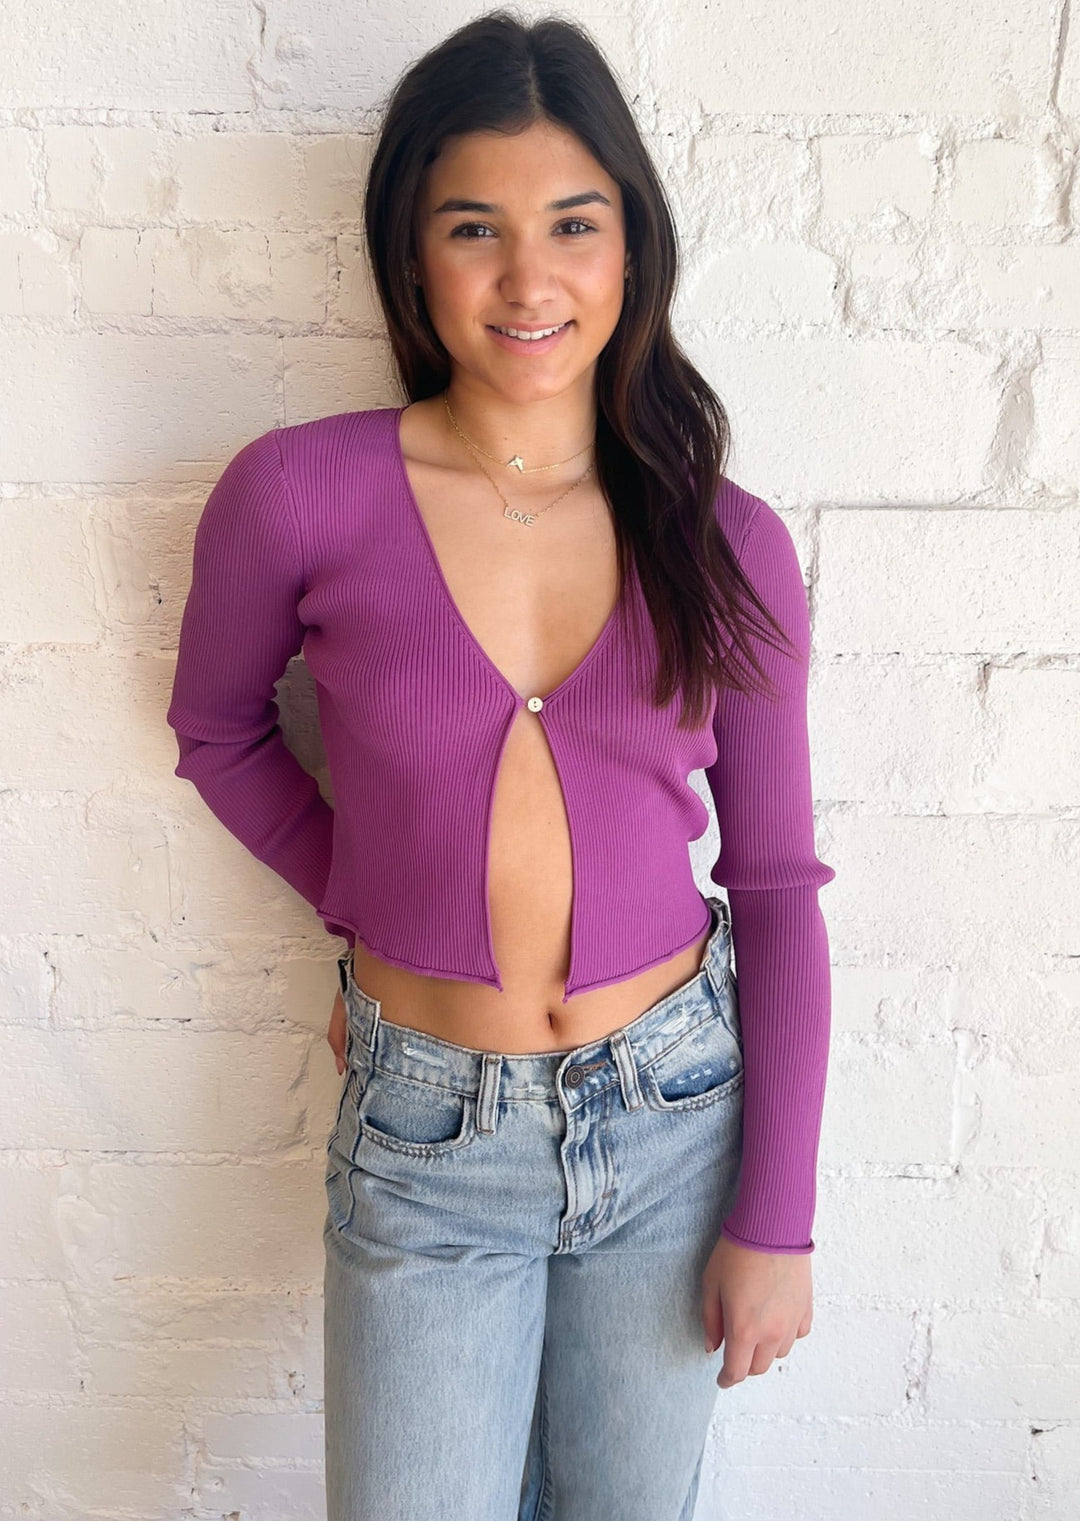 Here To Mingle Top, Tops, Adeline, Adeline, dallas boutique, dallas texas, texas boutique, women's boutique dallas, adeline boutique, dallas boutique, trendy boutique, affordable boutique